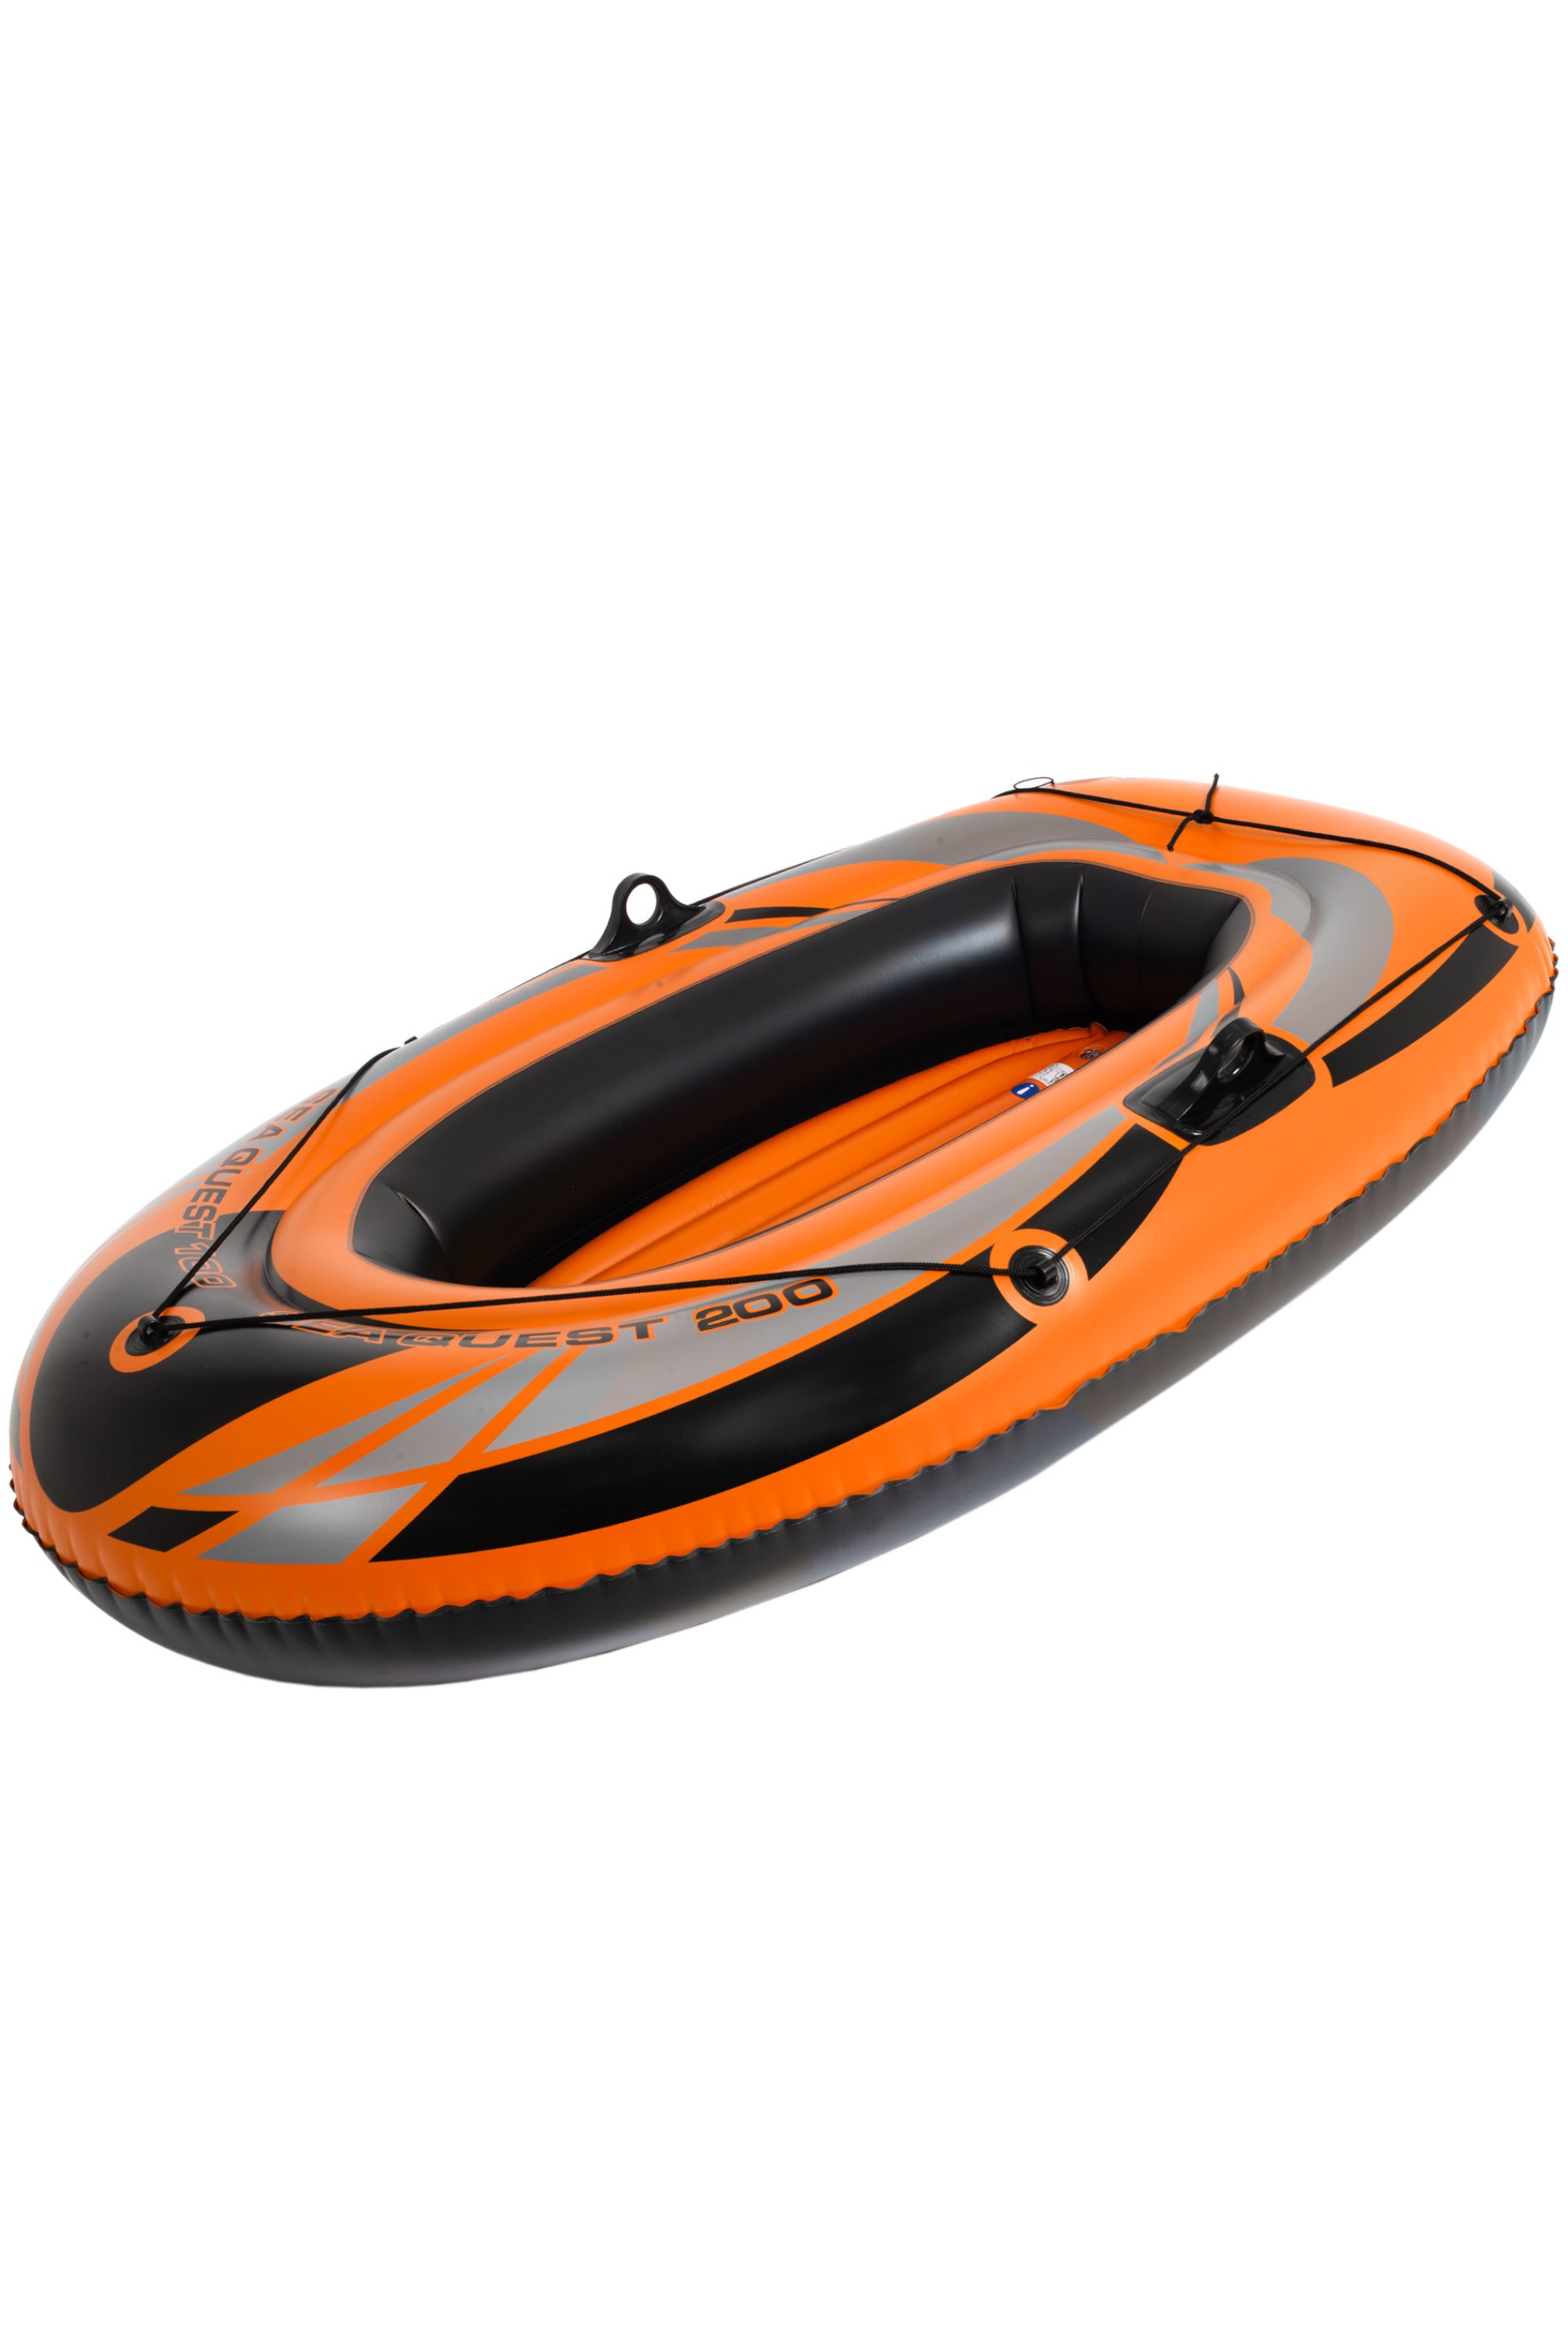 Sea Quest 200 Inflatable Boat -